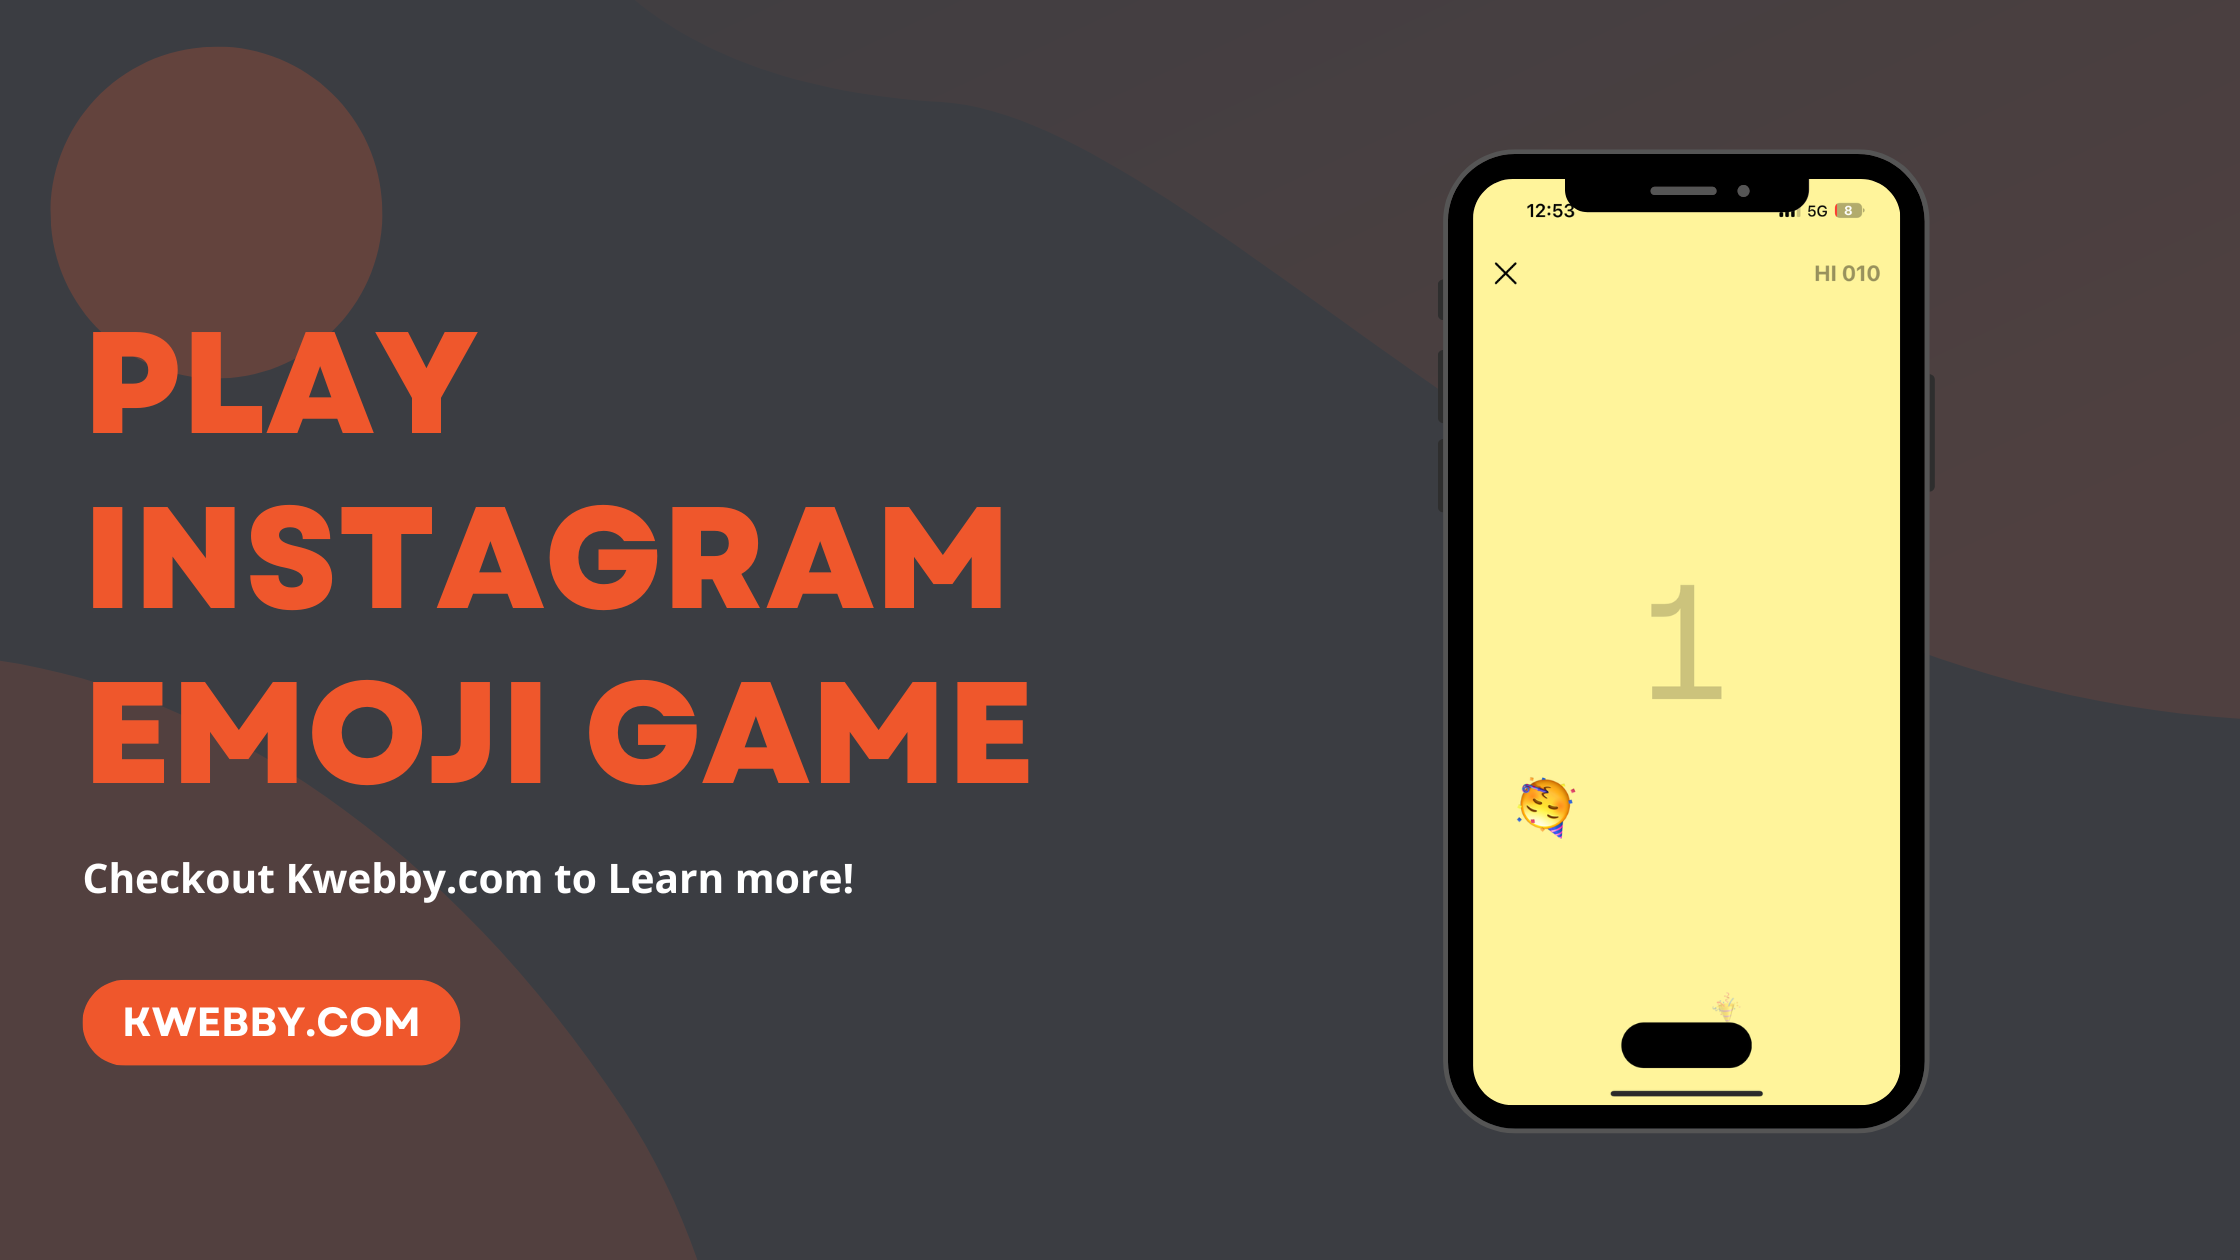 How To Play Instagram Emoji Game In 2 Taps